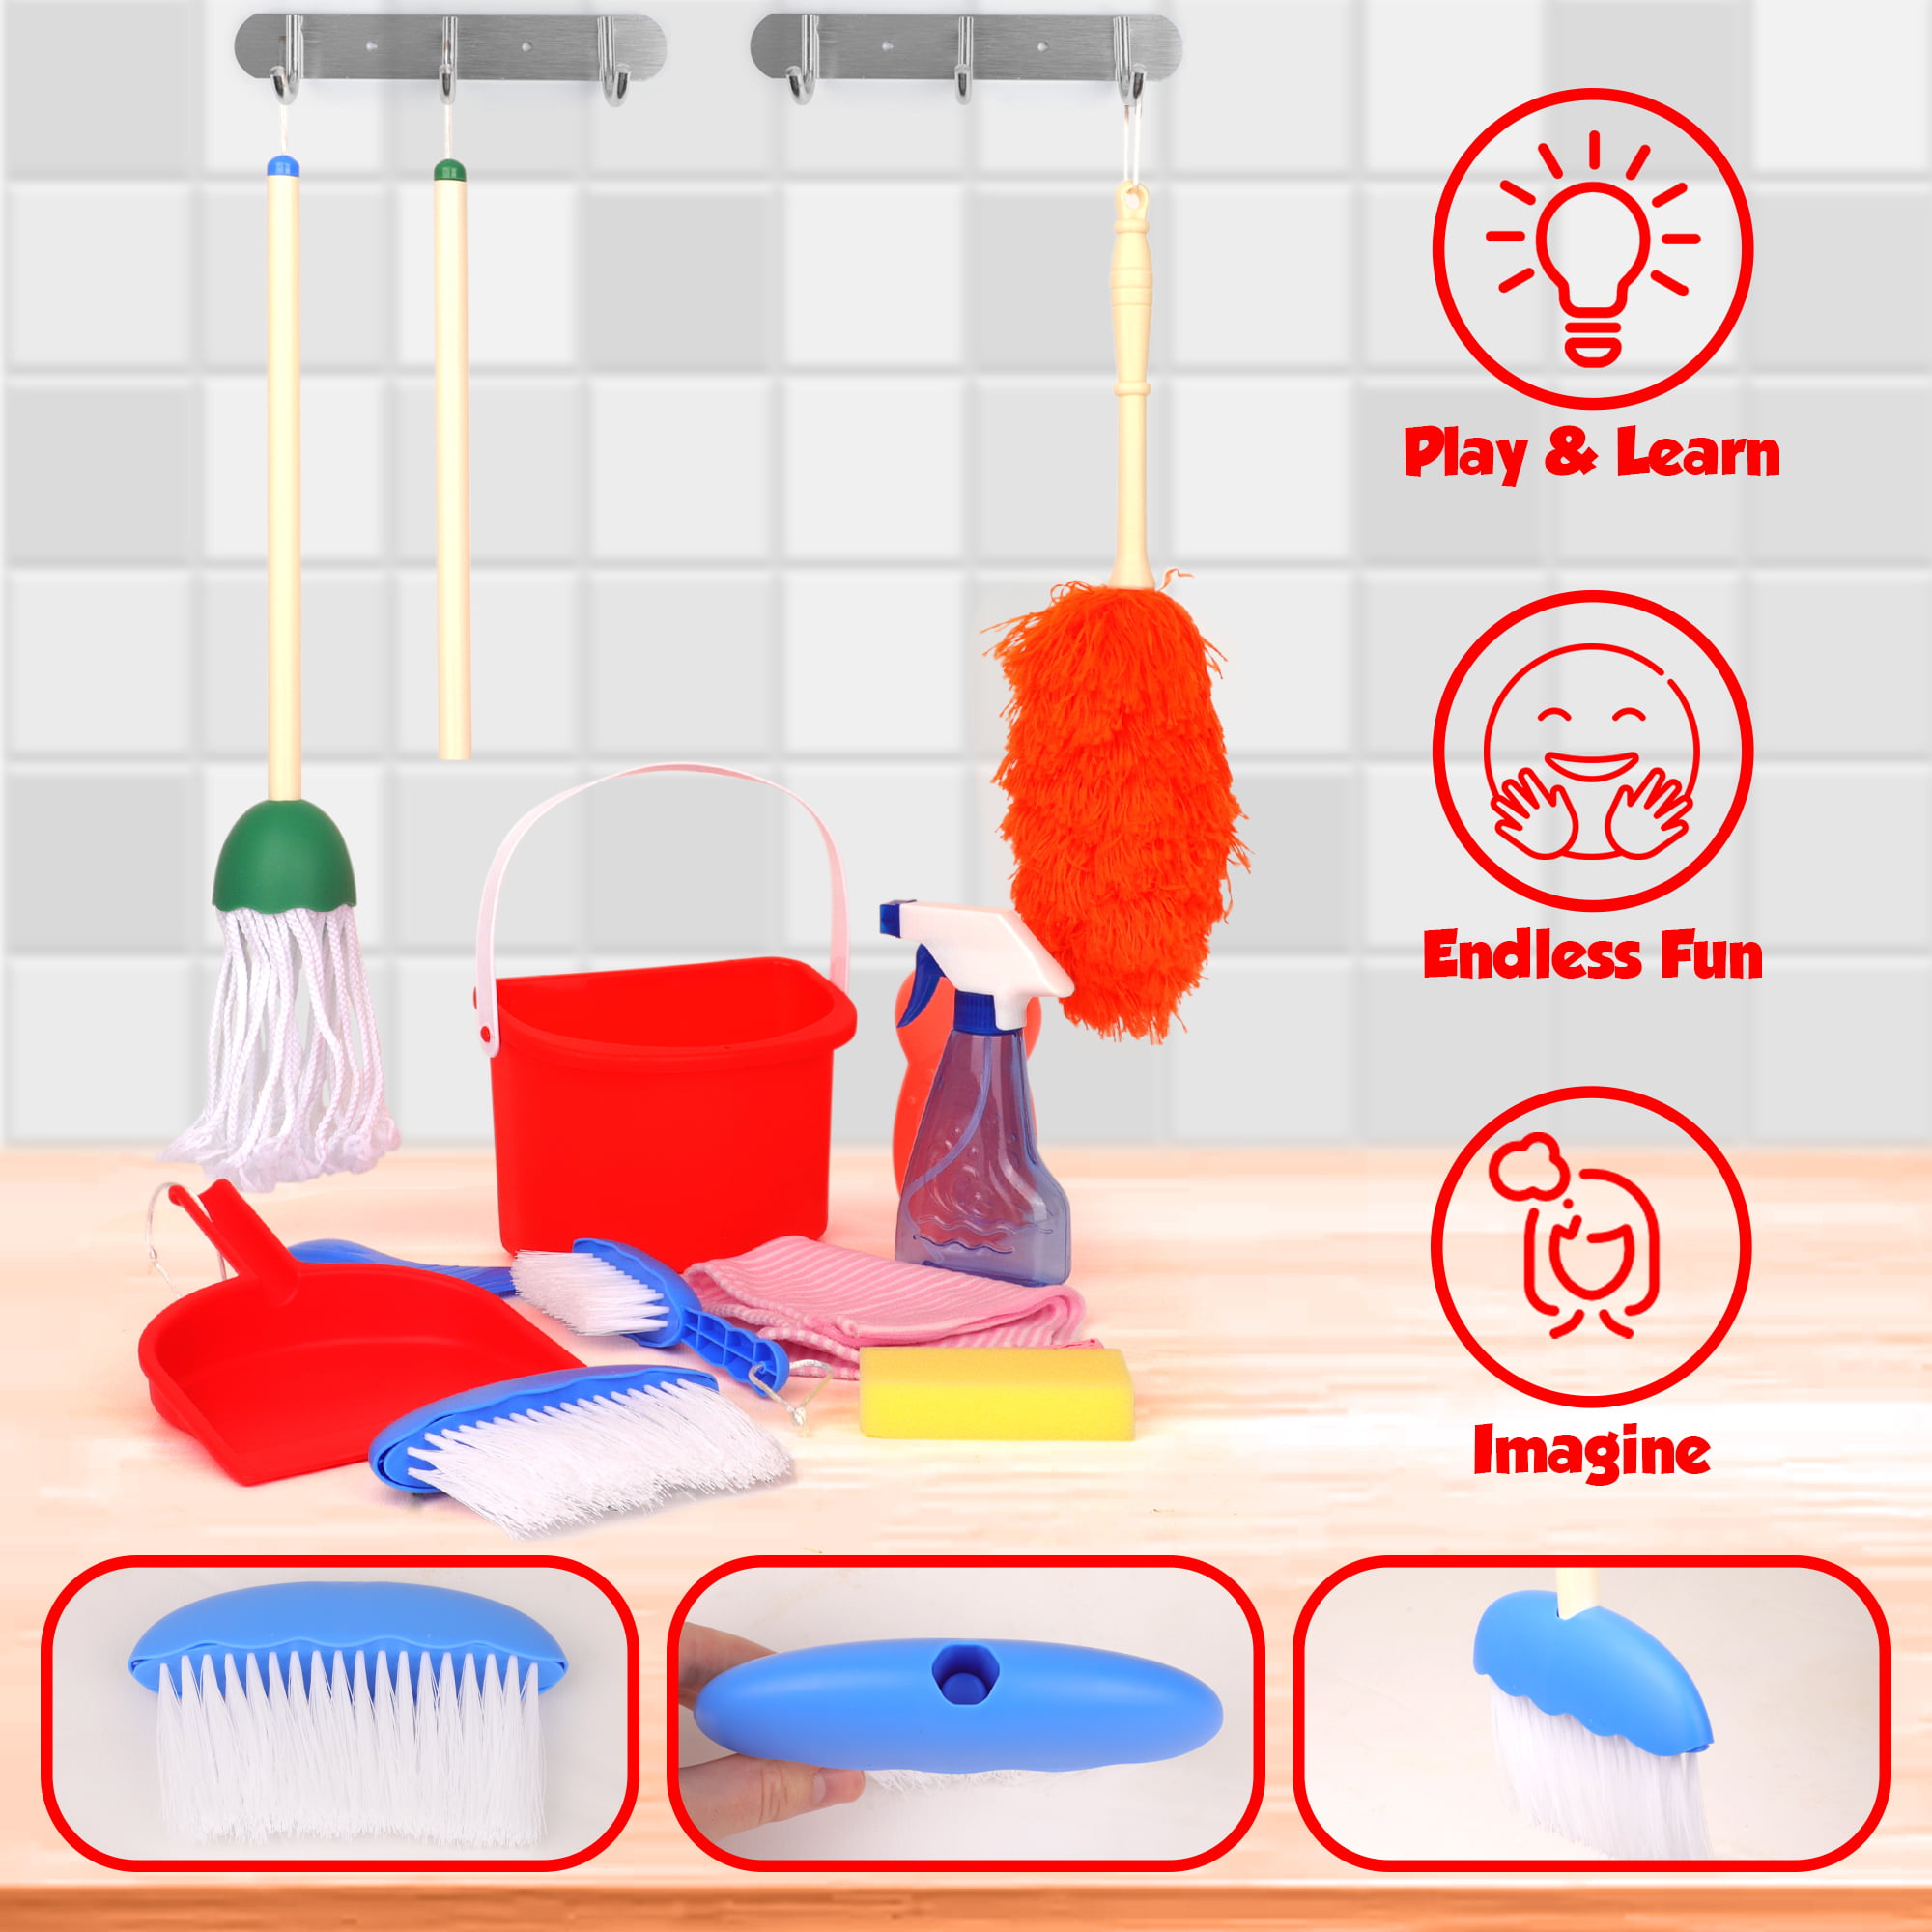 Playkidz Cleaning Caddy Set, 10Pcs Includes Spray, Sponge, Squeegee, Brush,  Organizer Caddy - Play Helper Realistic Housekeeping Set, Recommended for